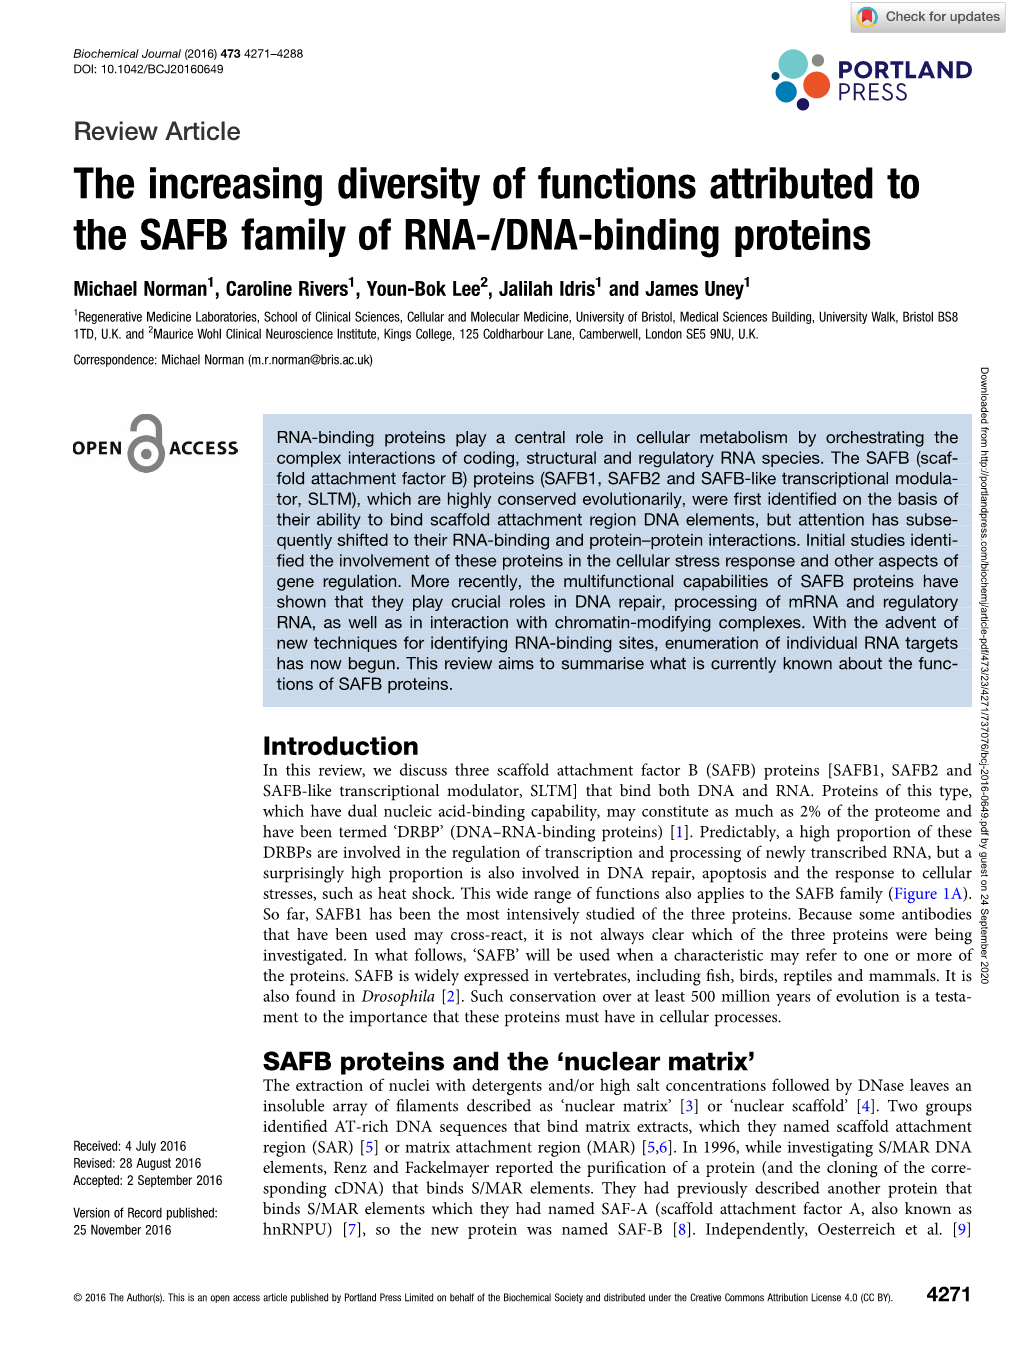 The Increasing Diversity of Functions Attributed to the SAFB Family of RNA-/DNA-Binding Proteins